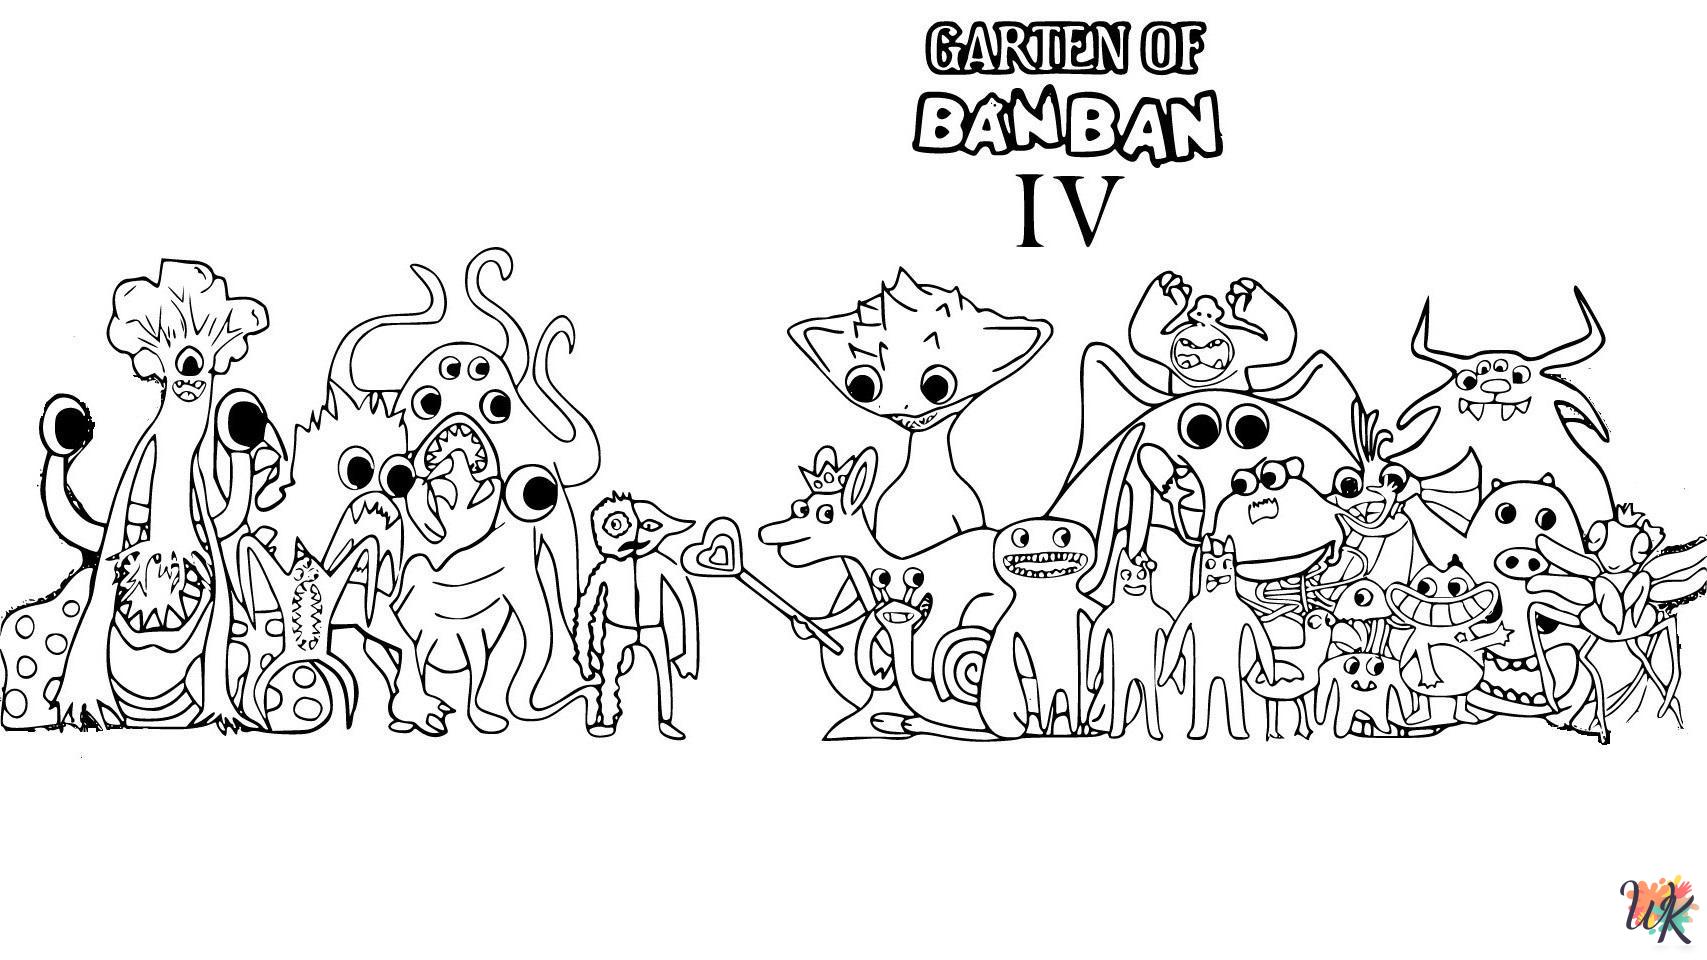 printable Garten Of Banban 4 coloring pages for adults